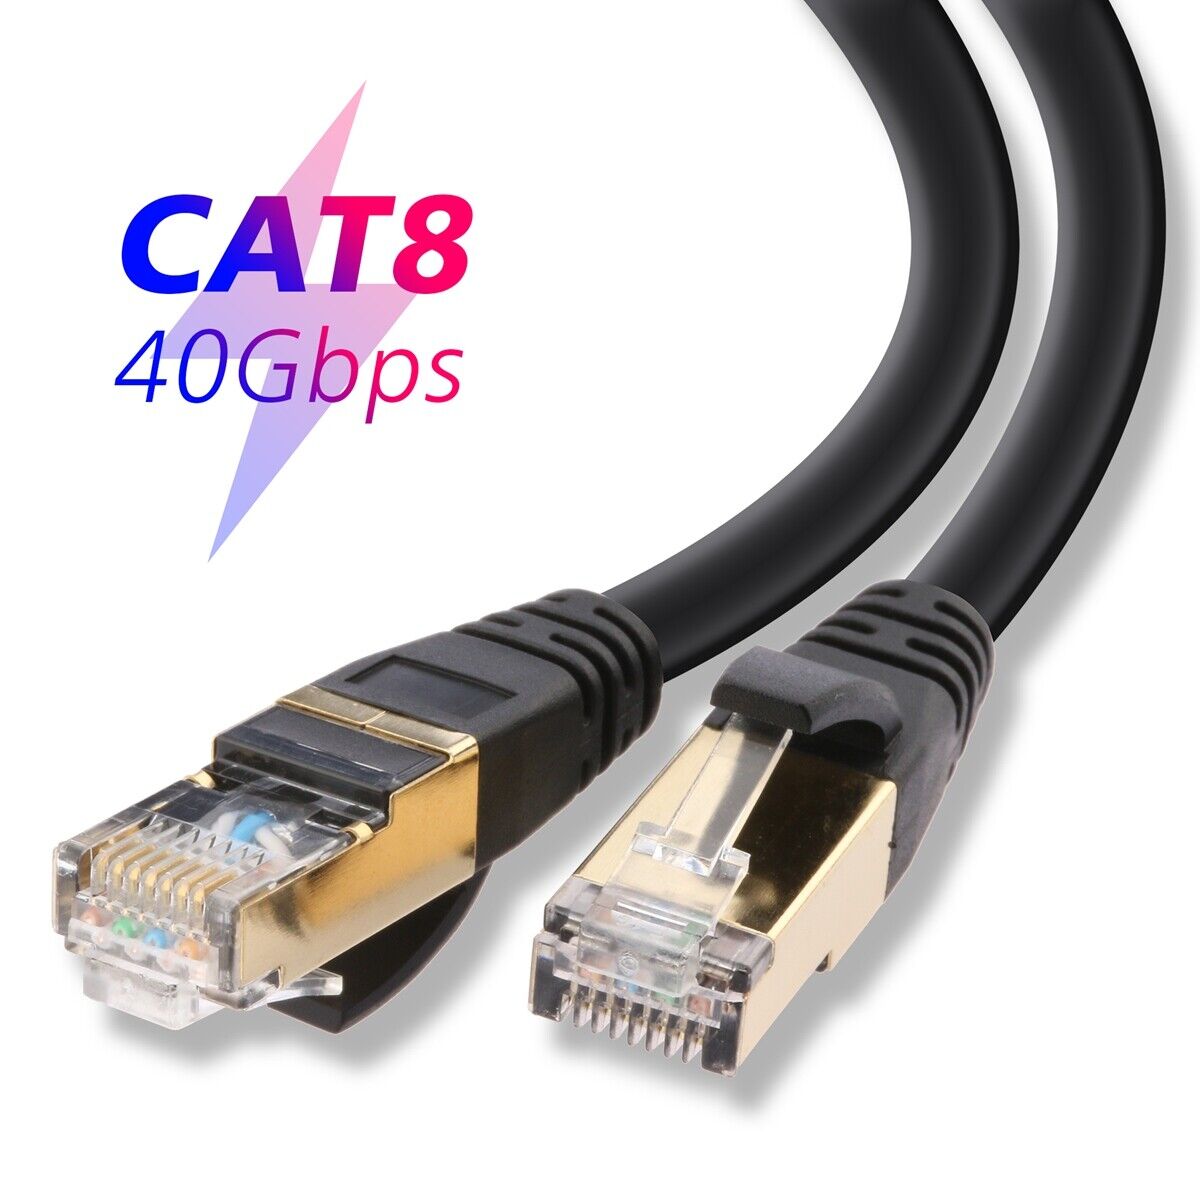 2021 PREMIUM Ethernet Cable CAT 8 7 Ultra High Speed LAN Patch Cord 6-100ft Lot